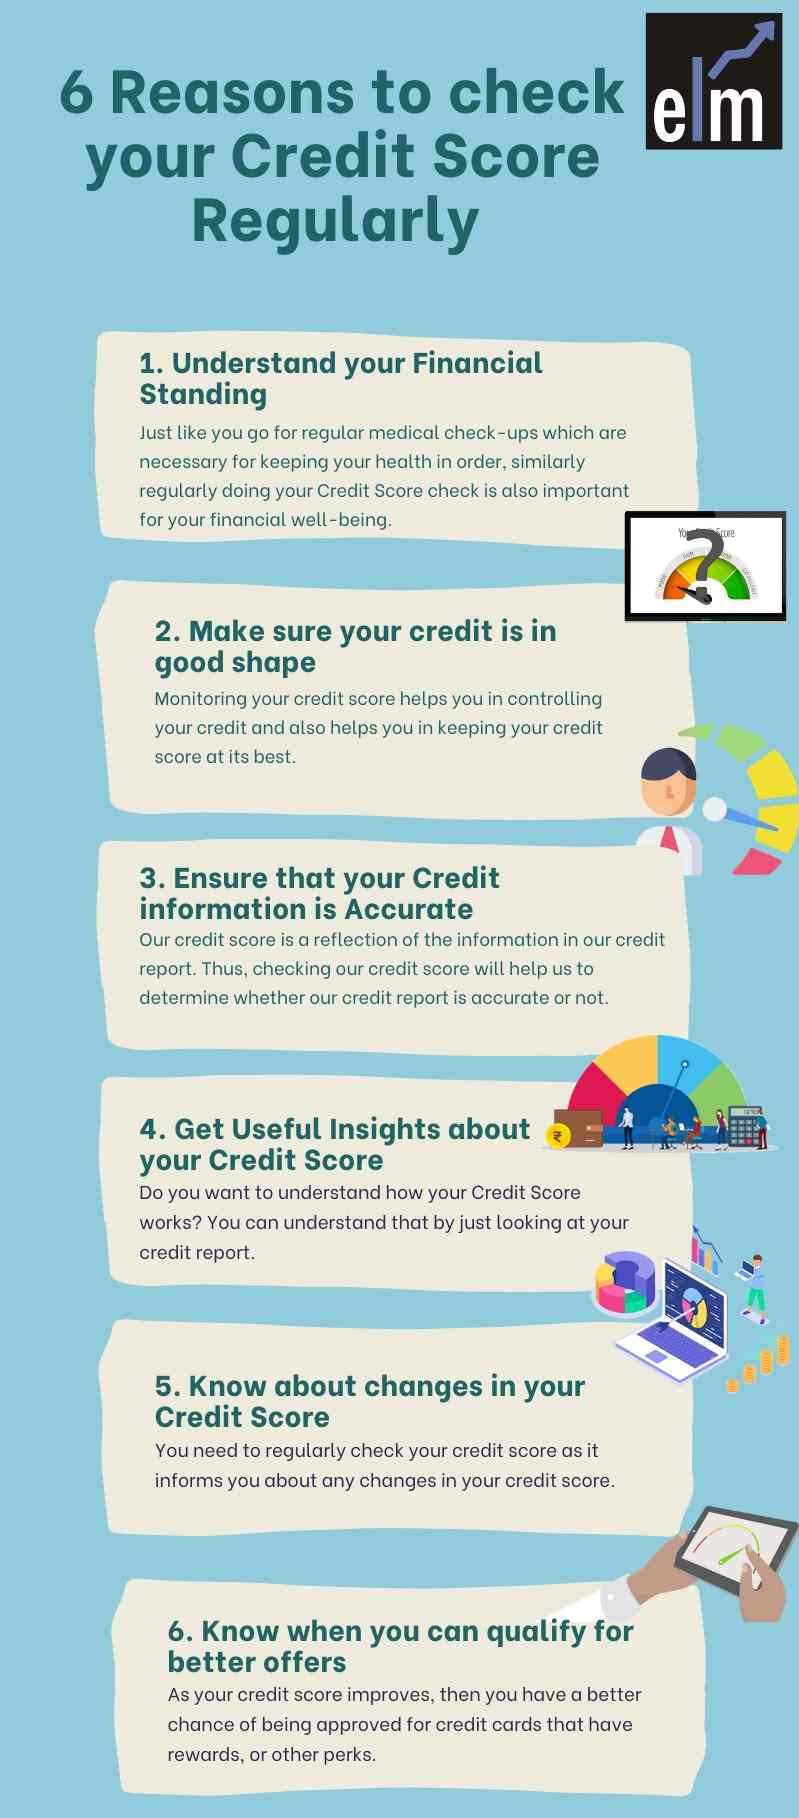 6 Reasons to check your Credit Score Regularly